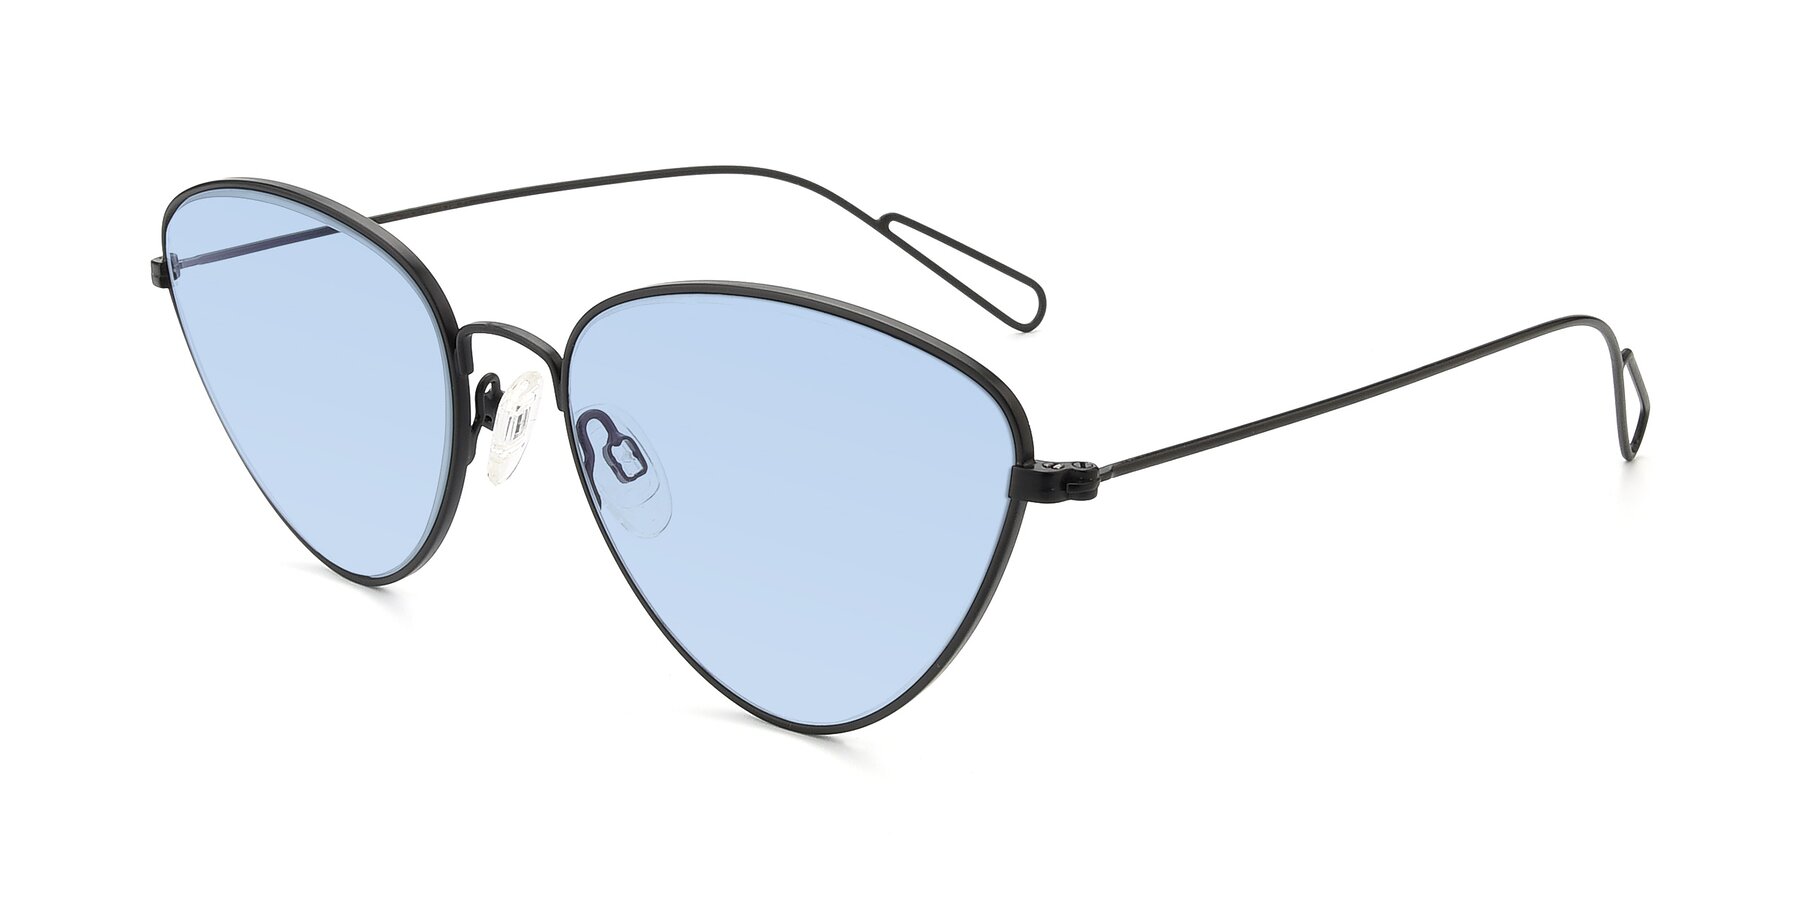 Angle of Butterfly Effect in Black with Light Blue Tinted Lenses